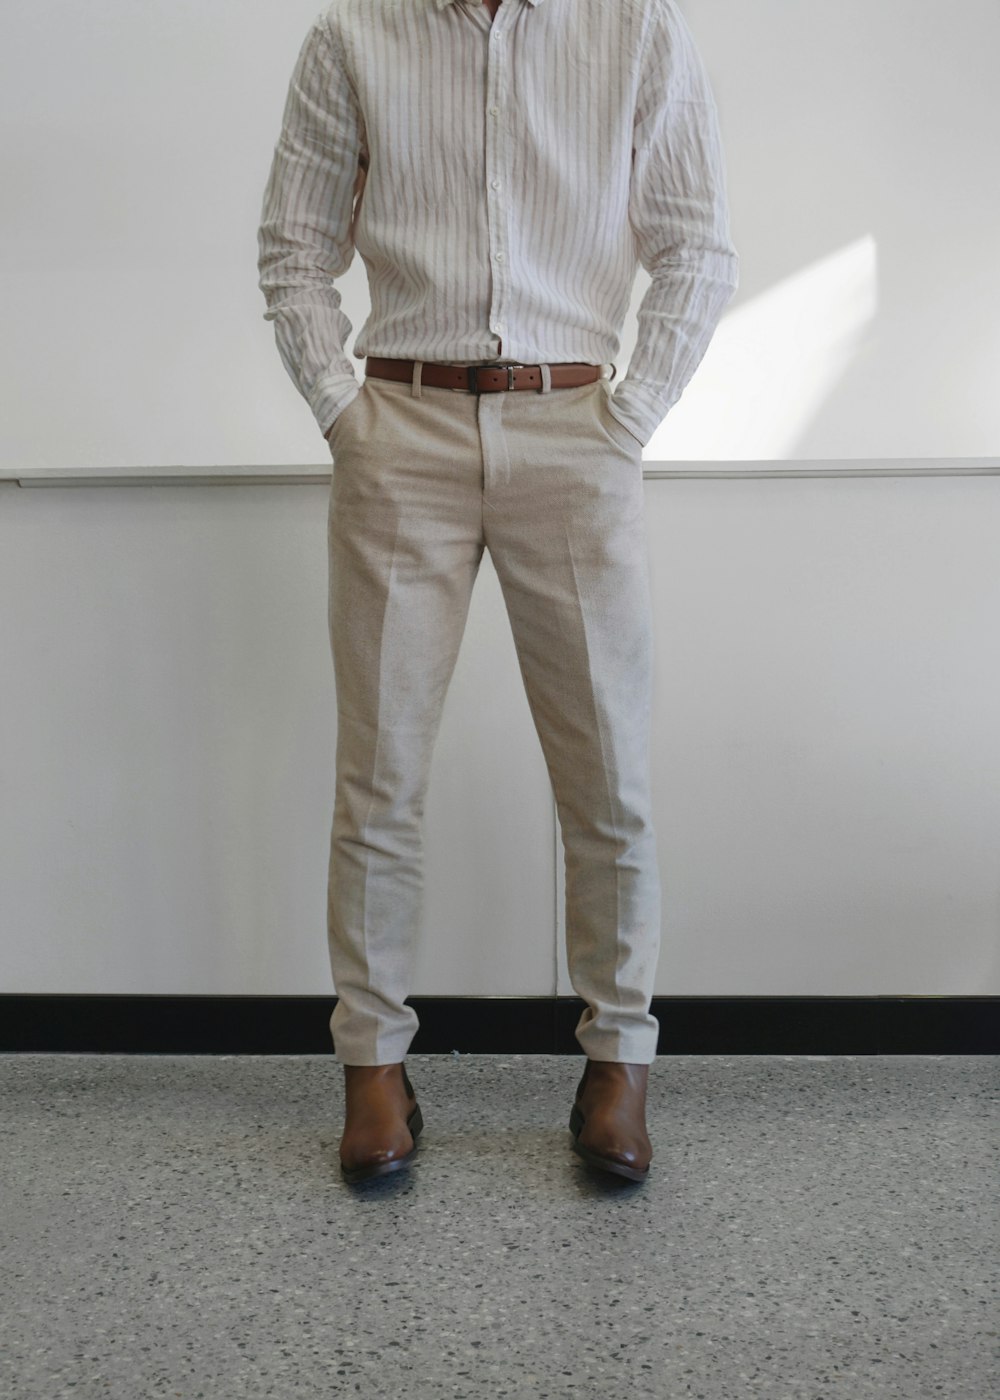 man in white and gray pinstripe dress shirt and white pants